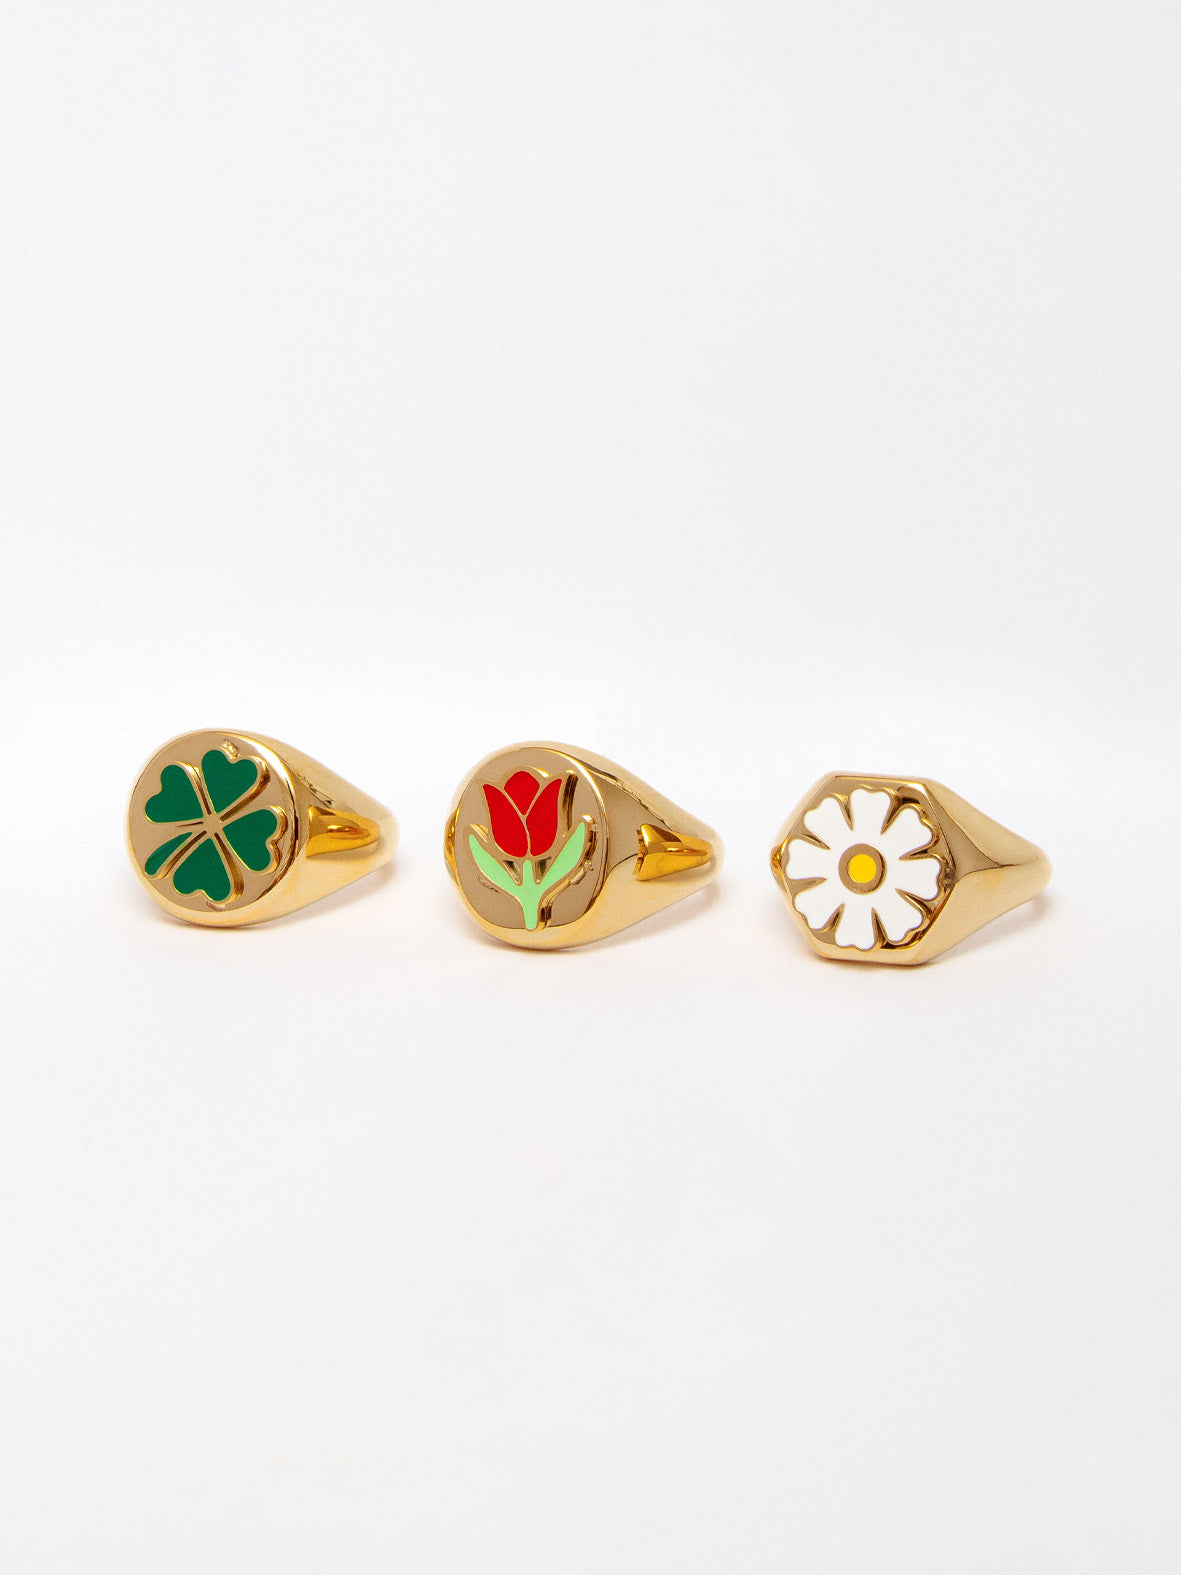 Gold Big Signet Ring With White Daisy Flower